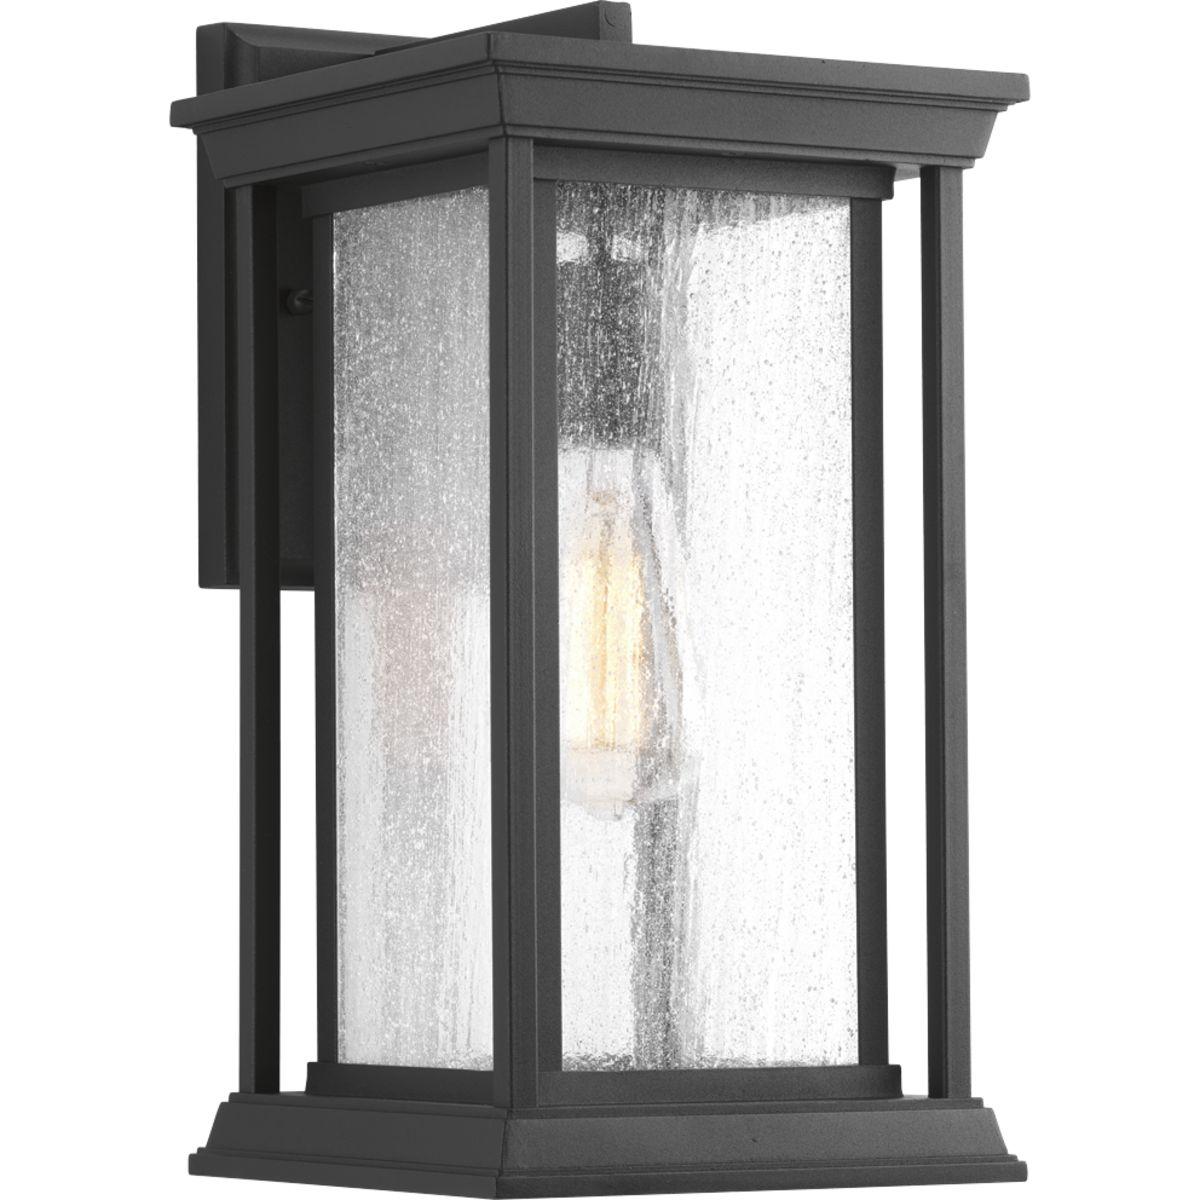 Hubbell P5610-31 One-Light medium wall lantern with a Craftsman-inspired silhouette, Endicott offers visual interest to your home's exterior. The elongated frame is finished with clear seeded glass.  ; Features a Craftsman-inspired silhouette ; An outdoor lantern with an 